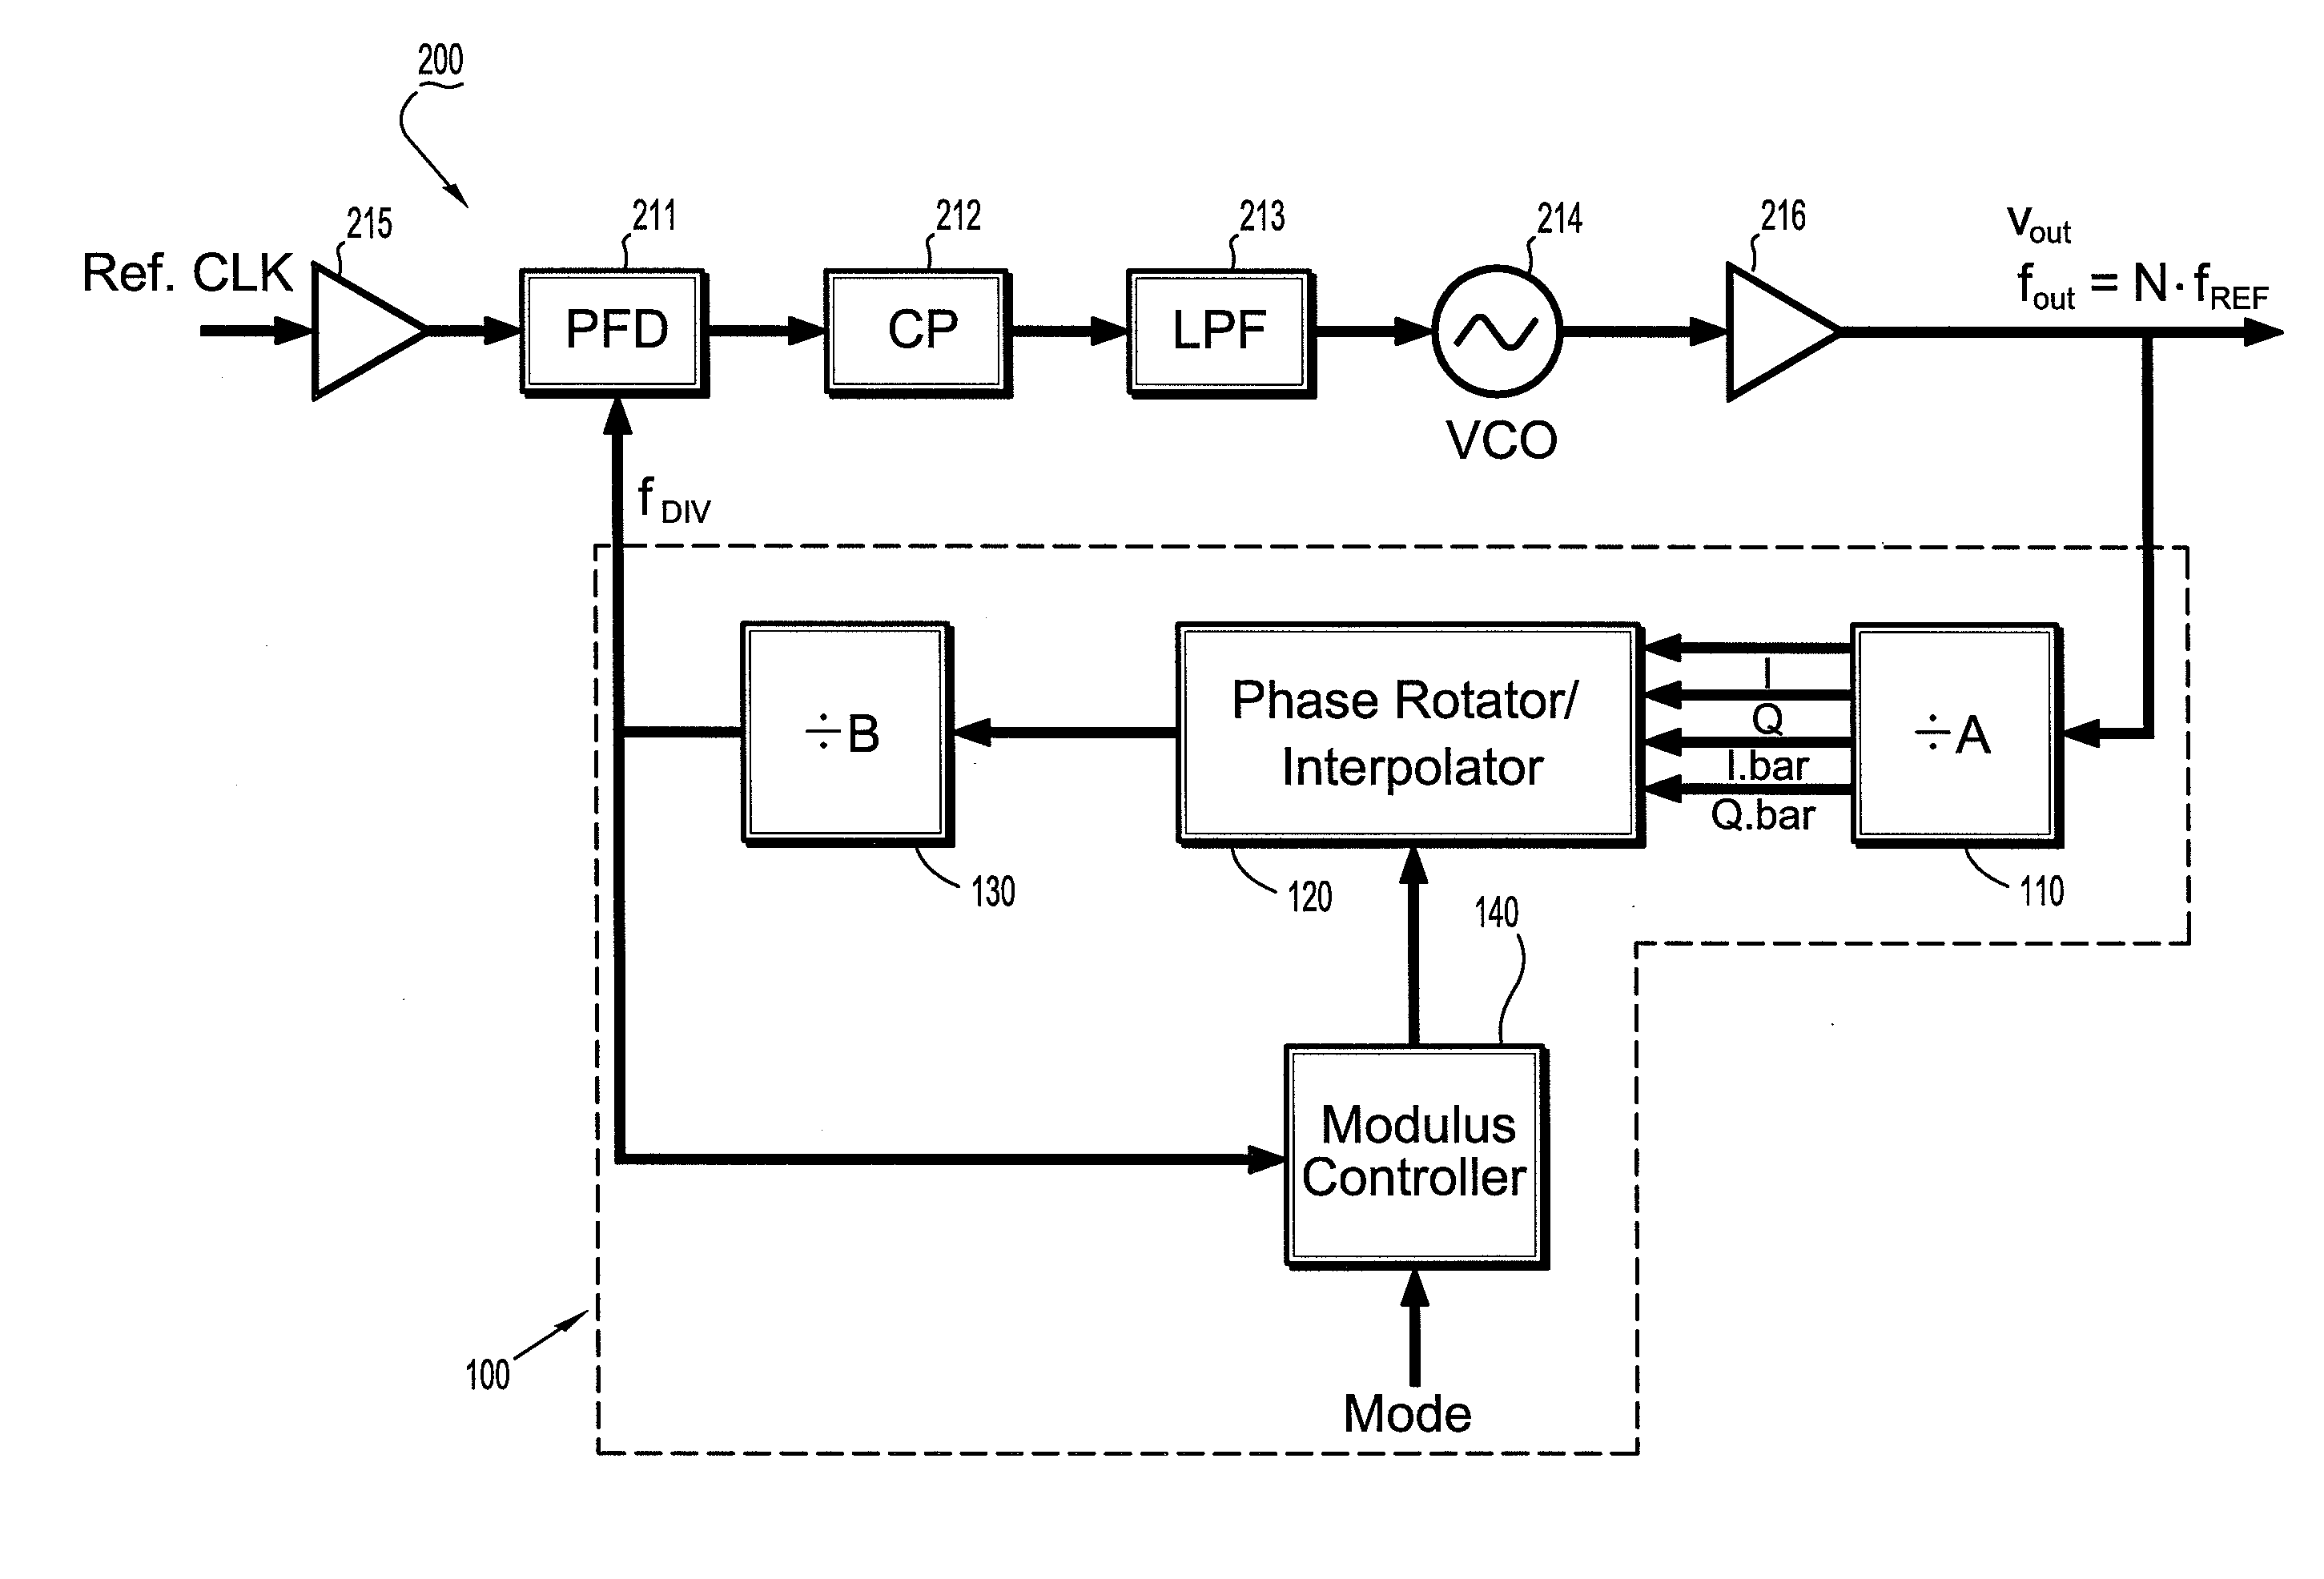 Circuits and methods for implementing sub-integer-n frequency dividers using phase rotators